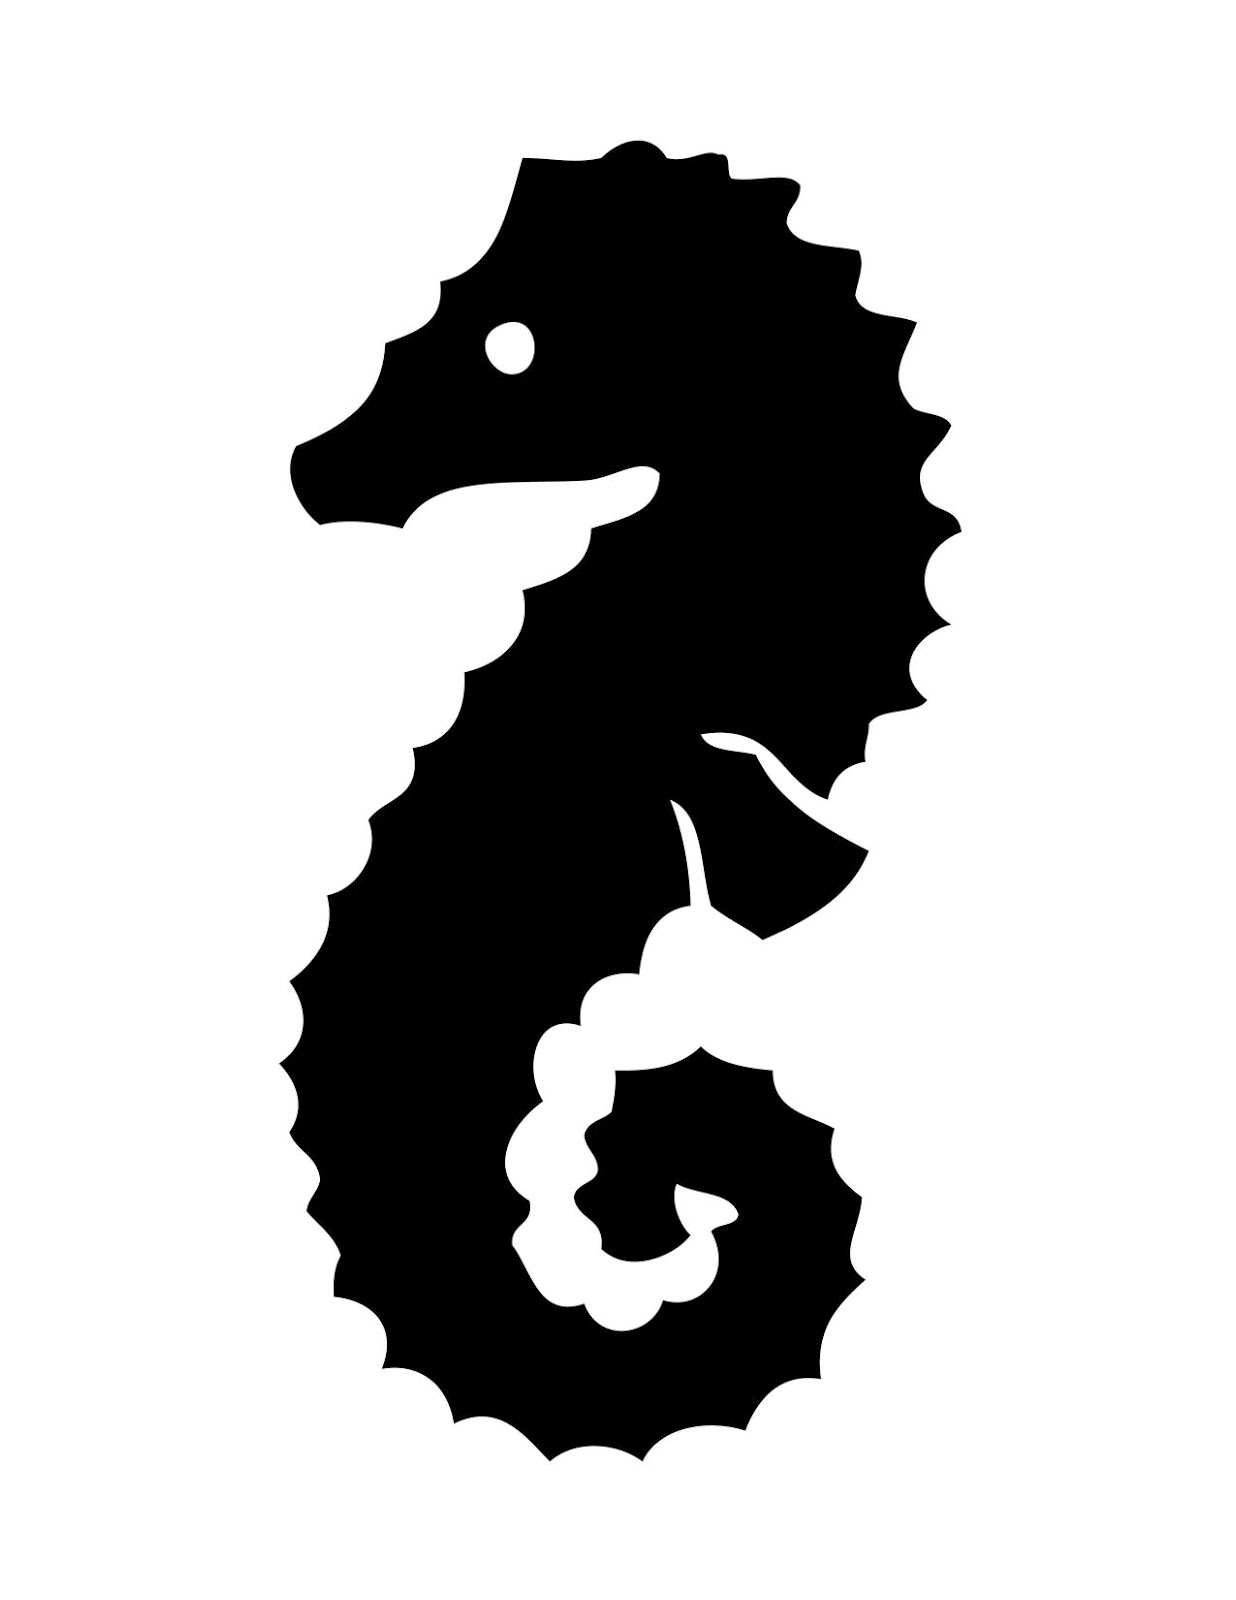 Transfer Printable - Seahorse Silhouettes - The Graphics Fairy